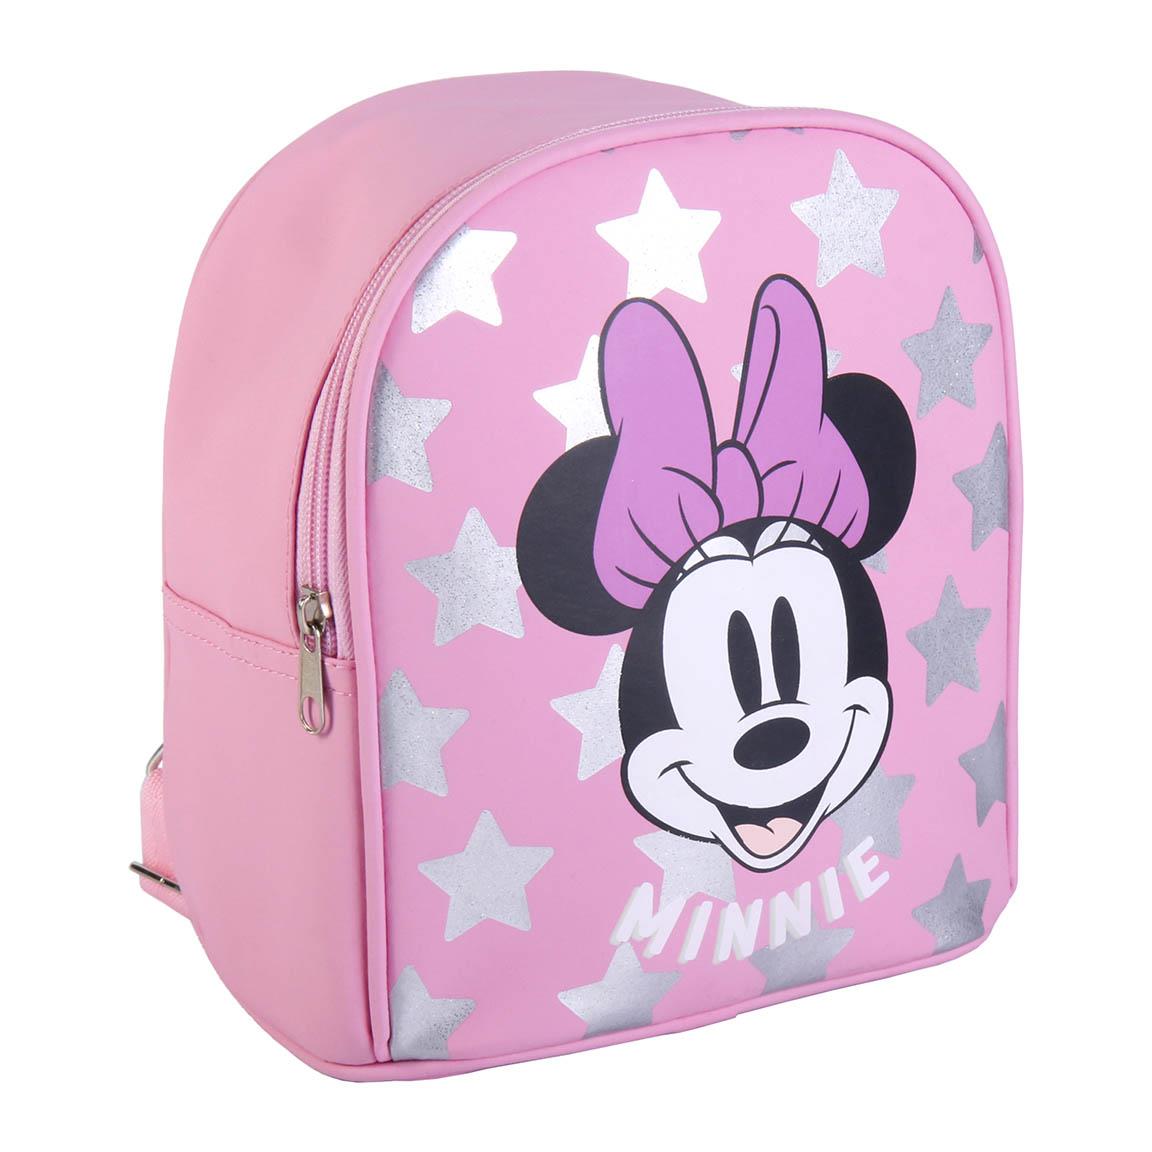 KIDS BACKPACK FREE TIME SPARKLY MINNIE